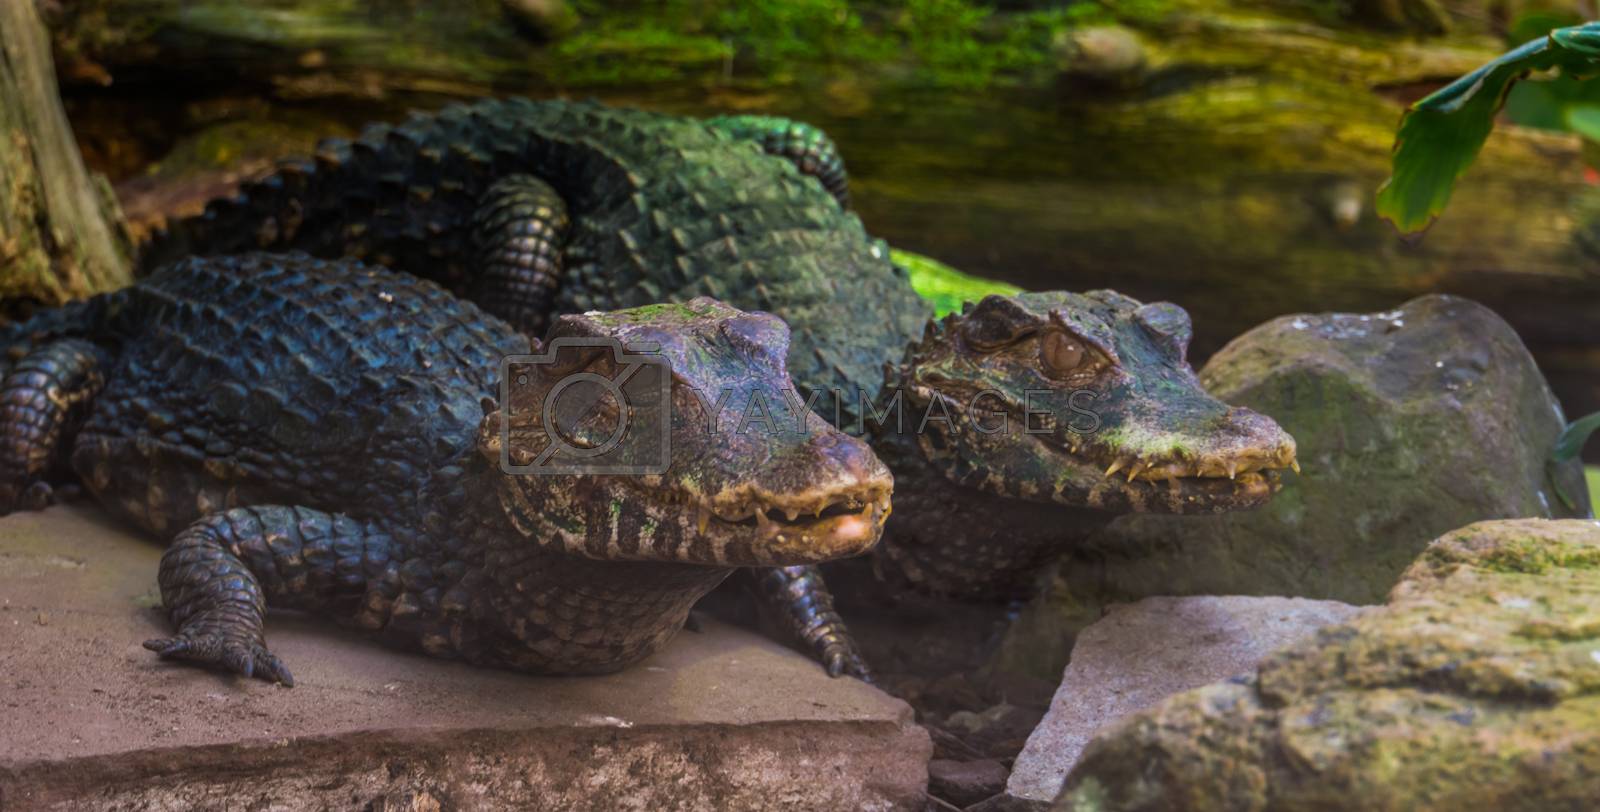 Royalty free image of couple of dwarf caiman crocodiles together, tropical reptile specie from America by charlottebleijenberg